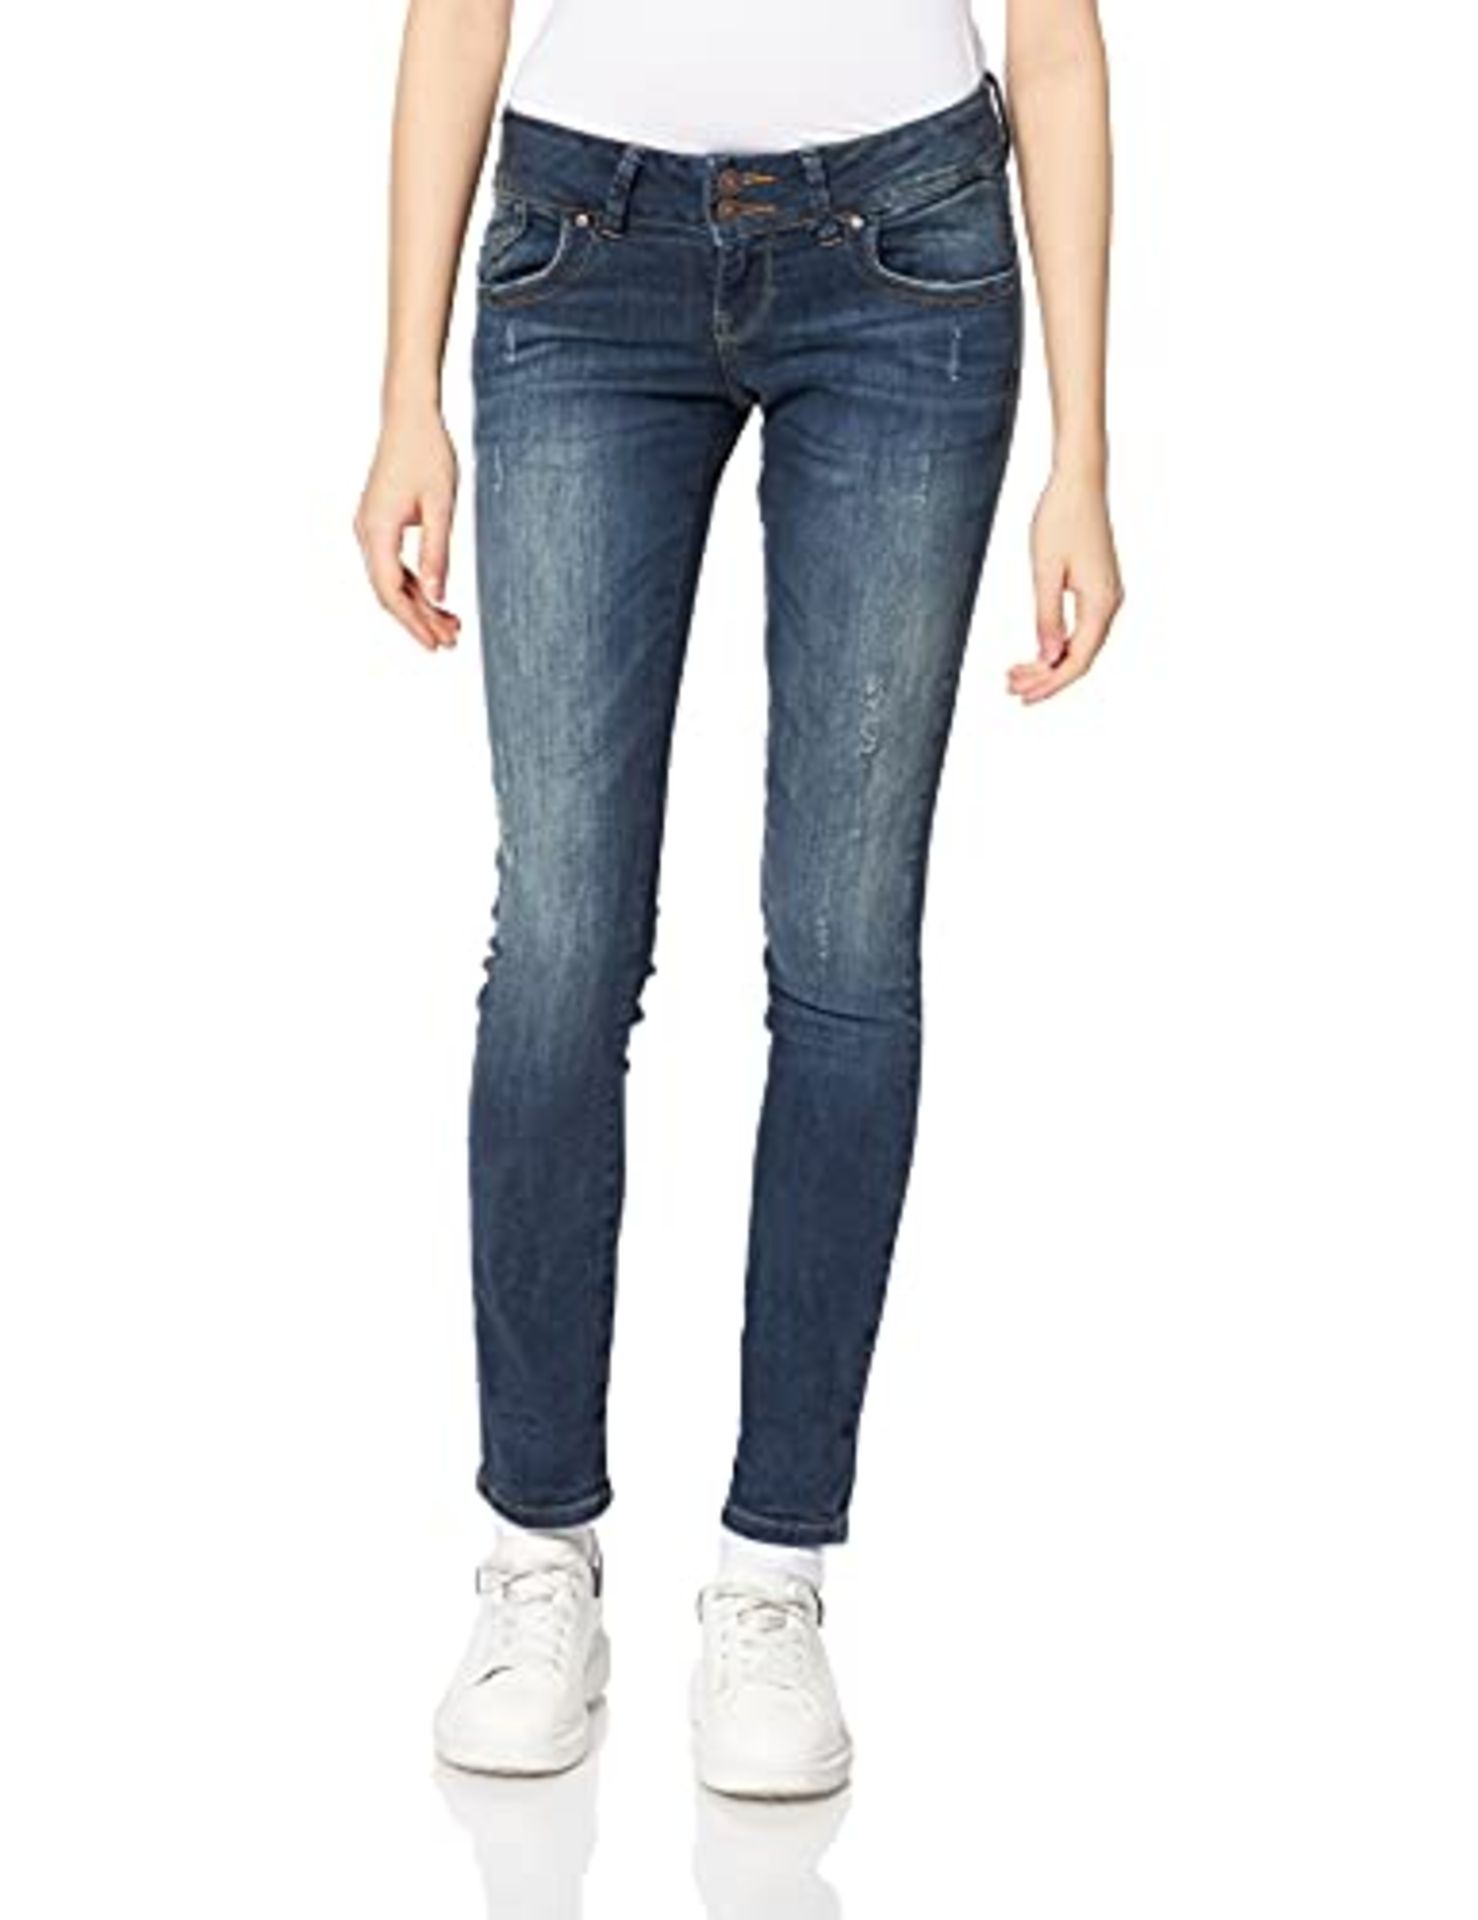 RRP £55.00 LTB Jeans Women's Molly Jeans, Oxford Wash, 26W / 30L